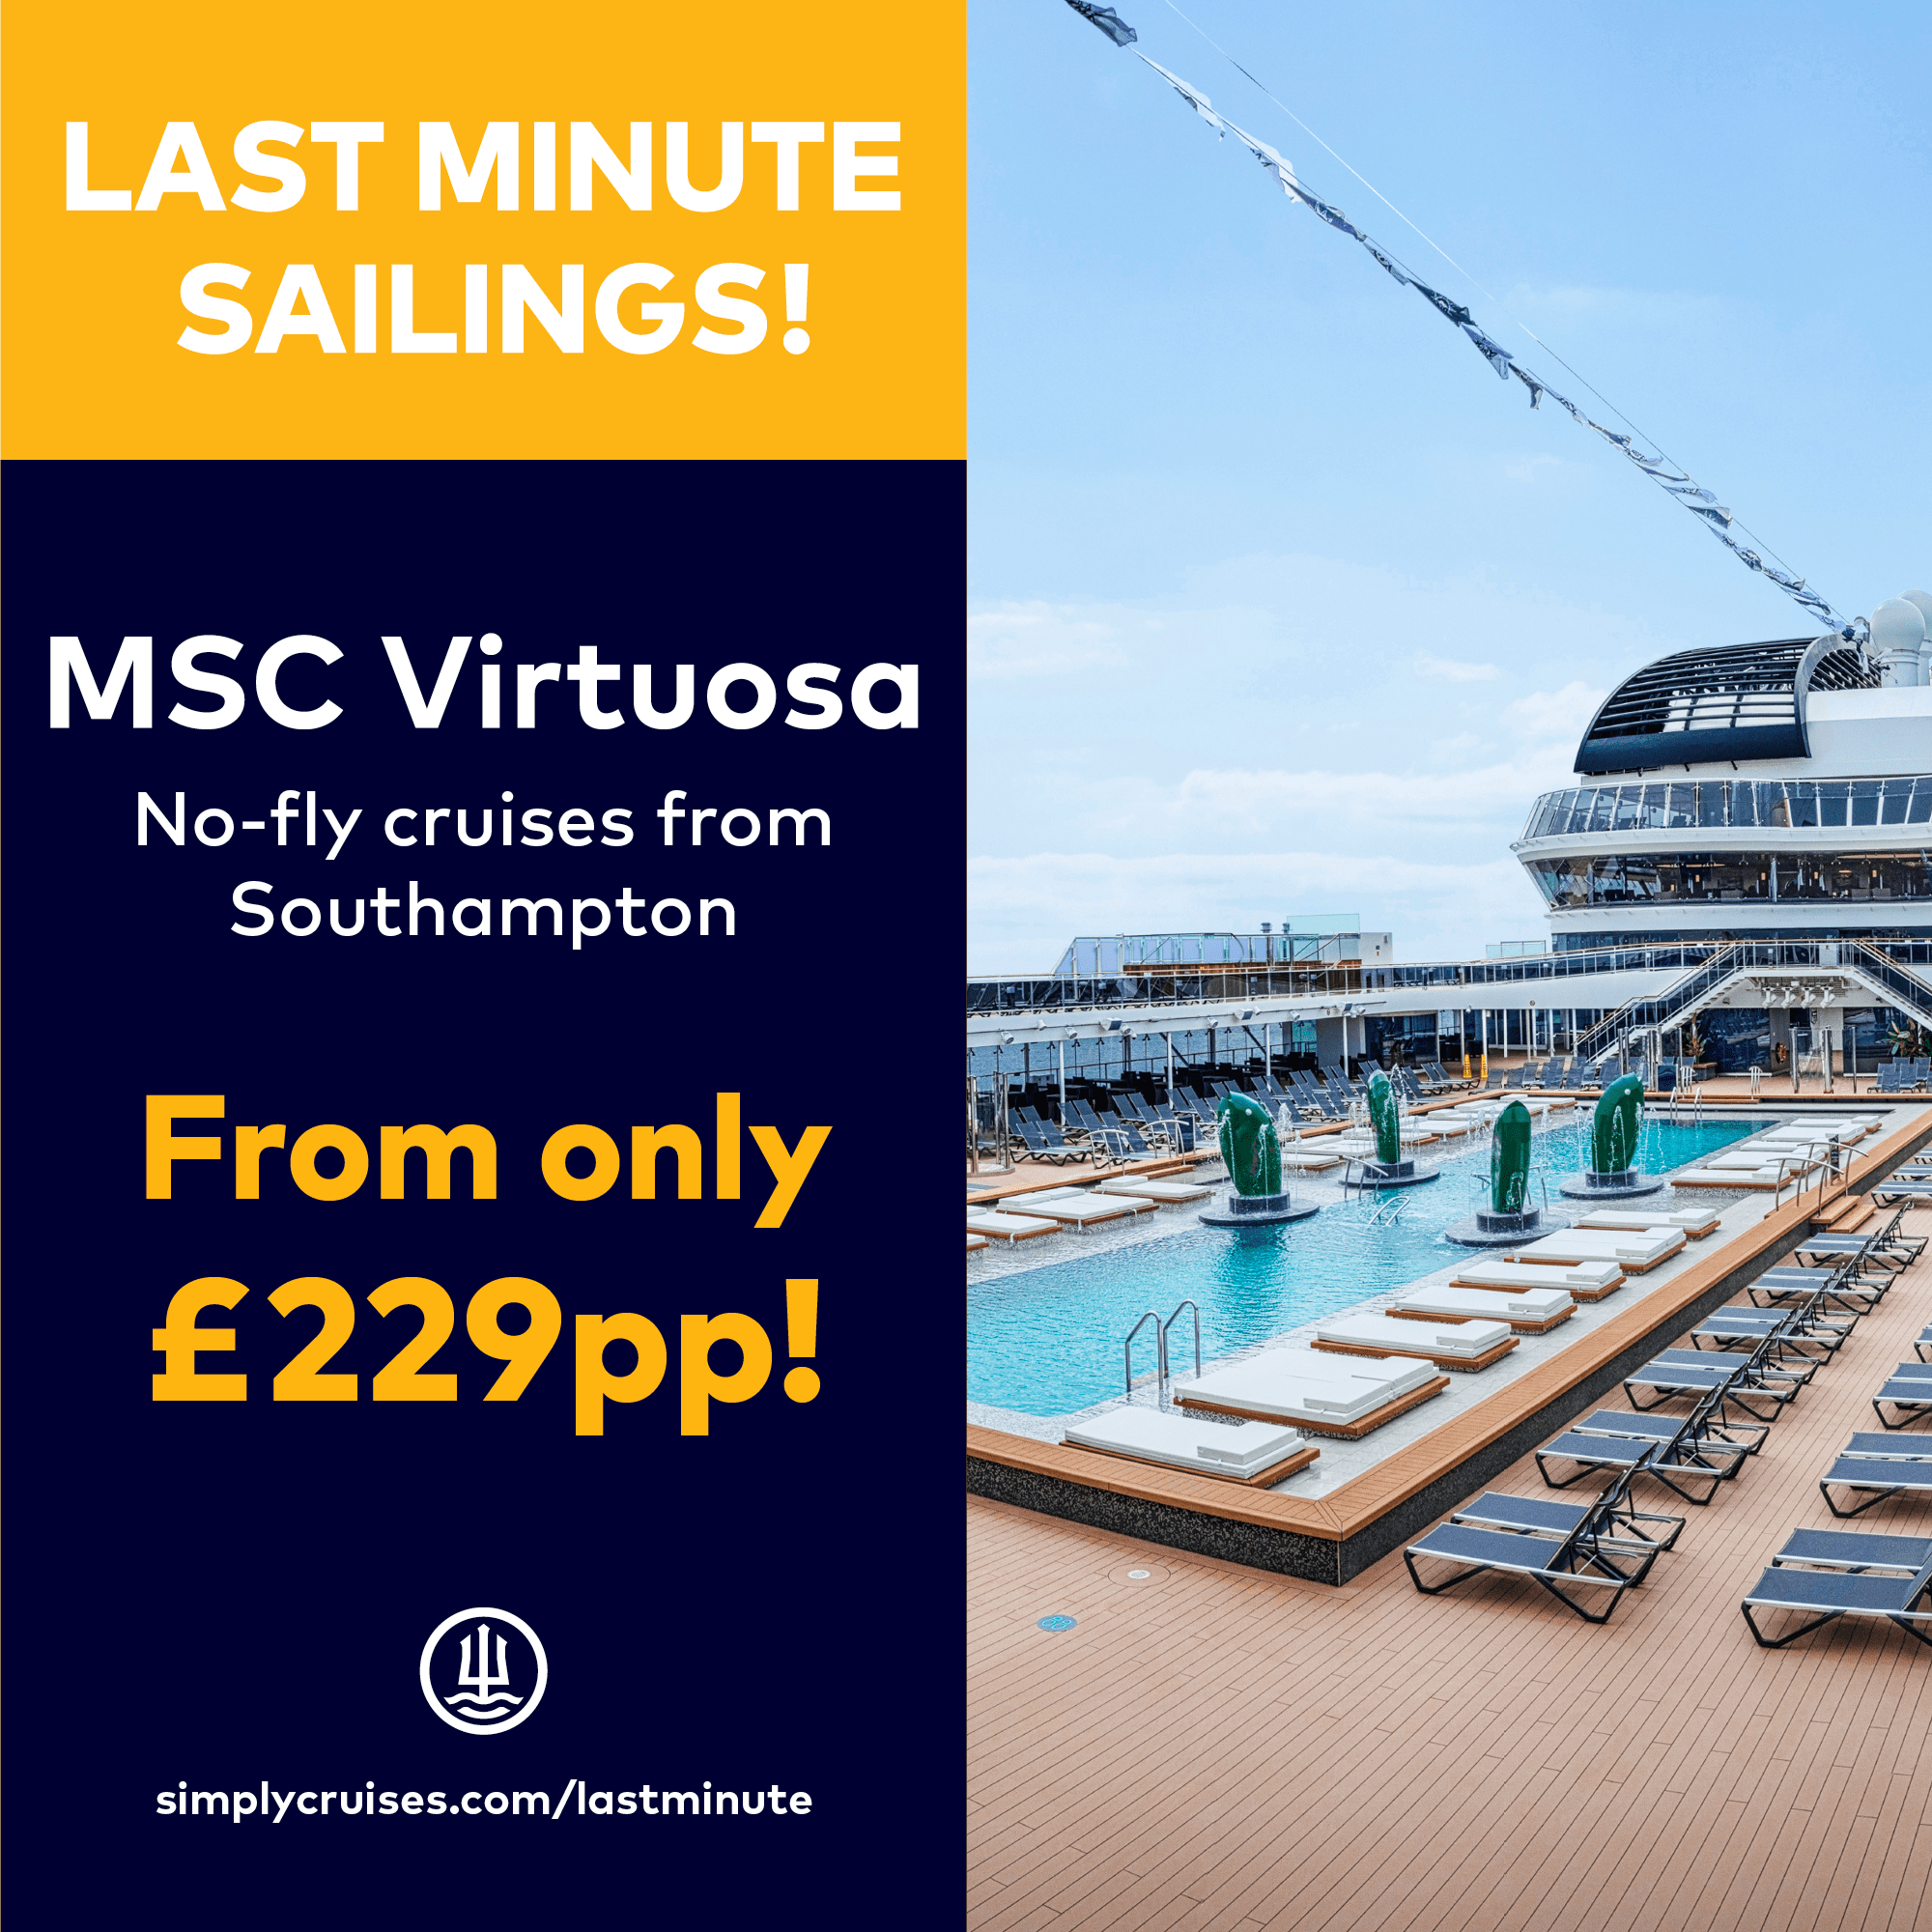 Last minute cruises from Southampton